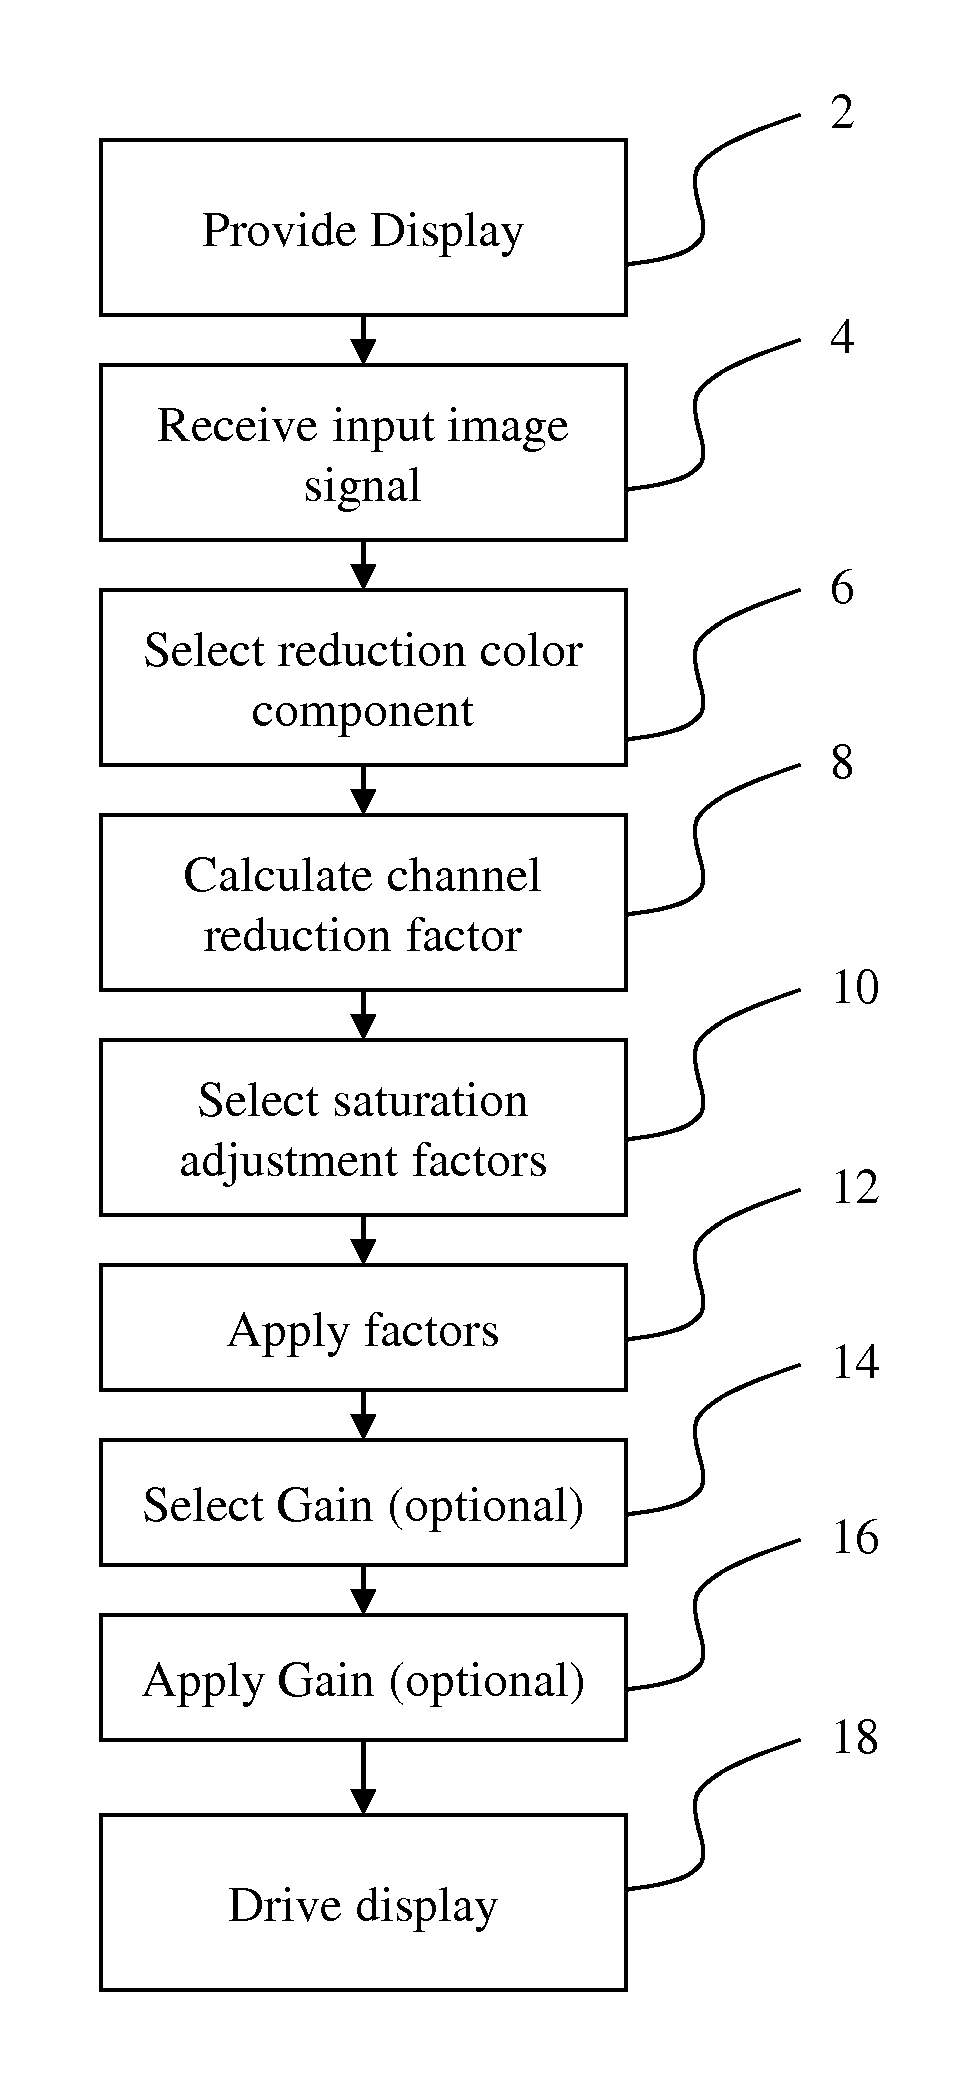 Four-channel display power reduction with desaturation